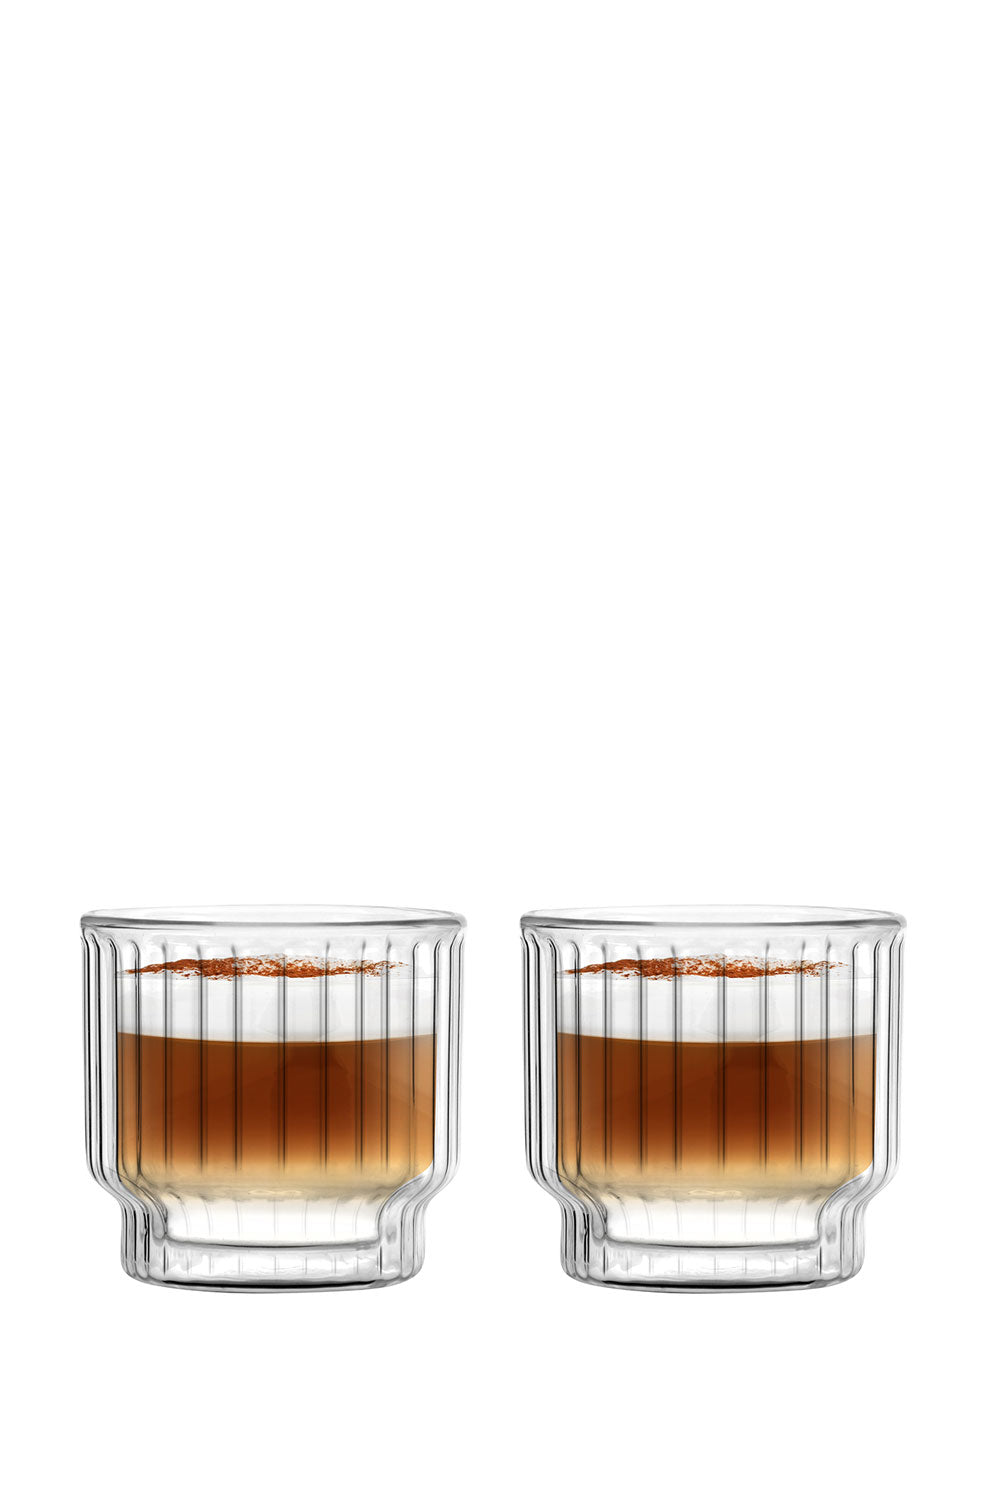 Lungo Double Wall Glasses 300 ml, Set of 2 - Maison7